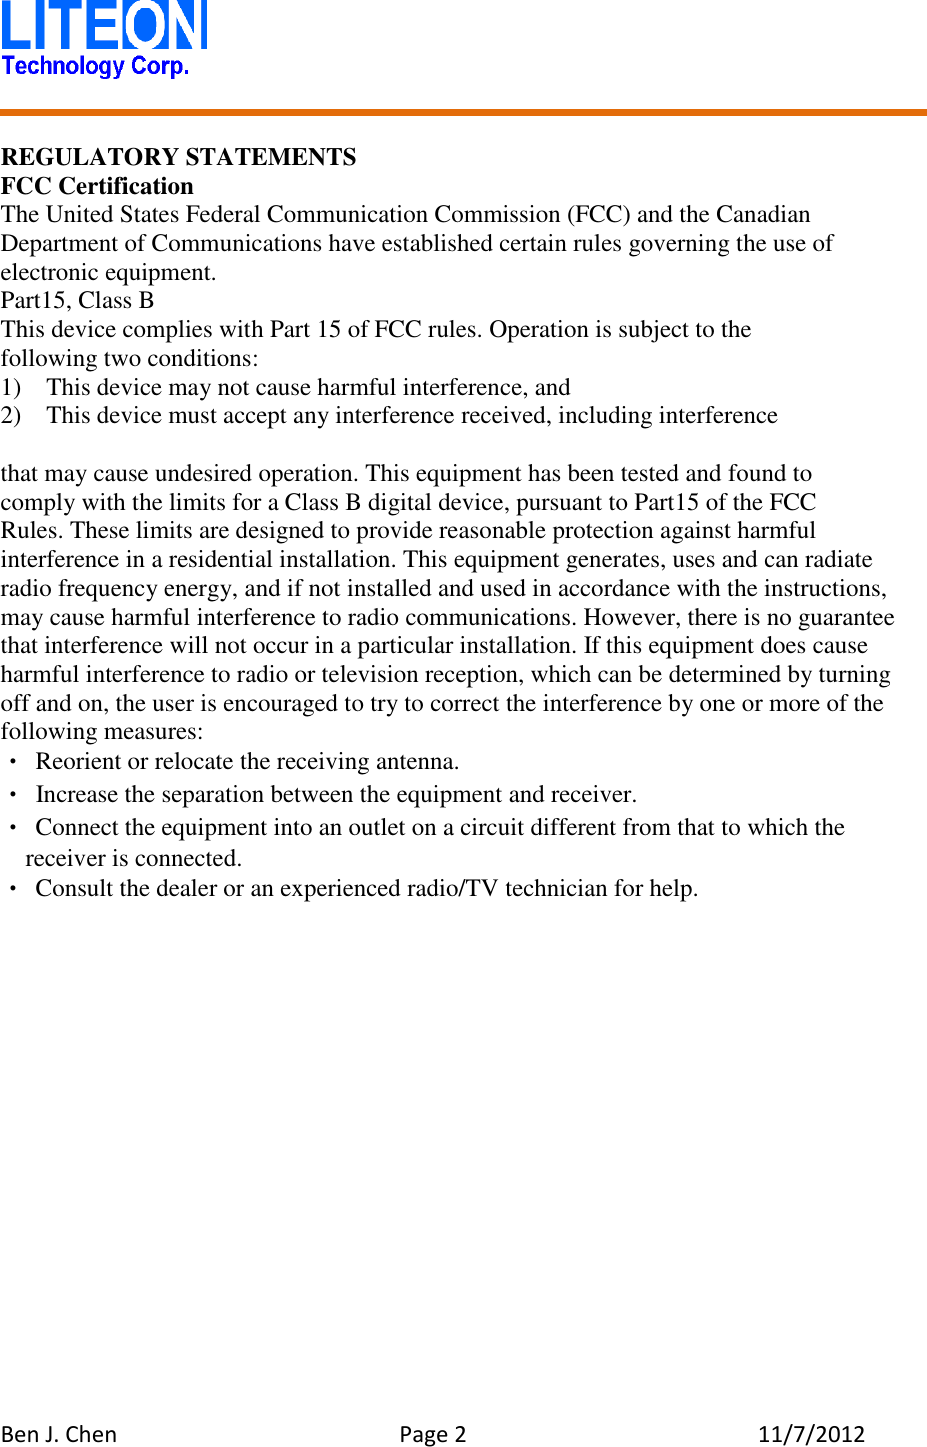   Ben J. Chen  Page 2  11/7/2012    REGULATORY STATEMENTS FCC Certification The United States Federal Communication Commission (FCC) and the Canadian Department of Communications have established certain rules governing the use of electronic equipment. Part15, Class B This device complies with Part 15 of FCC rules. Operation is subject to the following two conditions: 1)    This device may not cause harmful interference, and 2)  This device must accept any interference received, including interference  that may cause undesired operation. This equipment has been tested and found to   comply with the limits for a Class B digital device, pursuant to Part15 of the FCC   Rules. These limits are designed to provide reasonable protection against harmful interference in a residential installation. This equipment generates, uses and can radiate radio frequency energy, and if not installed and used in accordance with the instructions, may cause harmful interference to radio communications. However, there is no guarantee that interference will not occur in a particular installation. If this equipment does cause harmful interference to radio or television reception, which can be determined by turning off and on, the user is encouraged to try to correct the interference by one or more of the following measures: • Reorient or relocate the receiving antenna. •  Increase the separation between the equipment and receiver. • Connect the equipment into an outlet on a circuit different from that to which the receiver is connected. • Consult the dealer or an experienced radio/TV technician for help.    